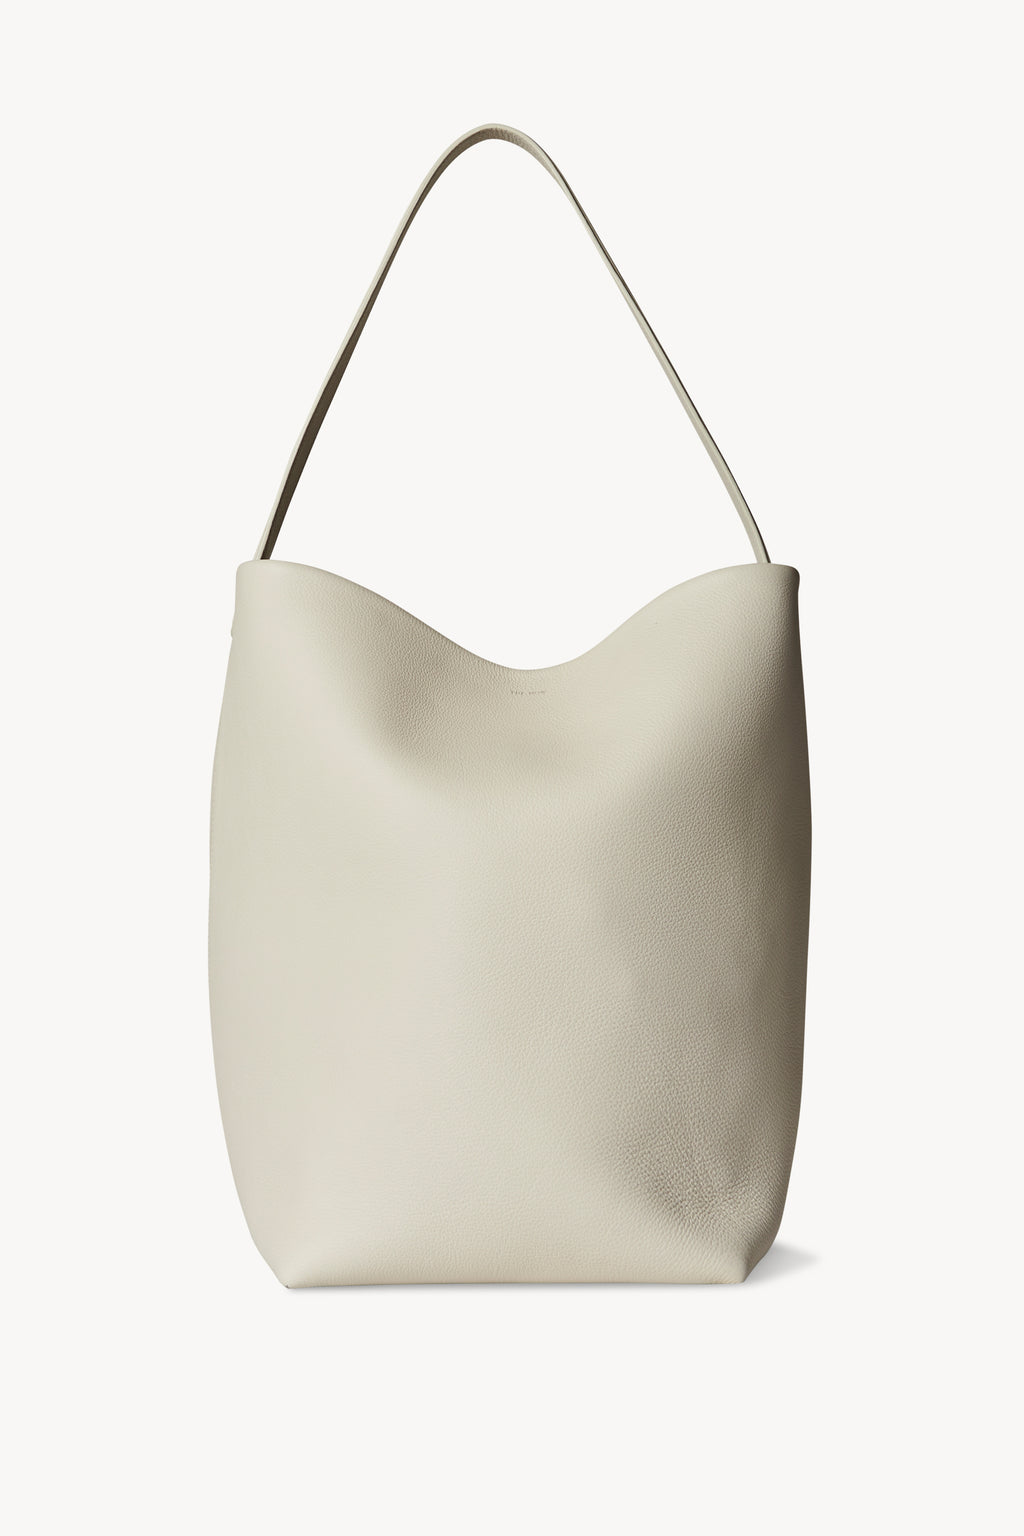 Shop The Row Large Park N/S Nylon Tote